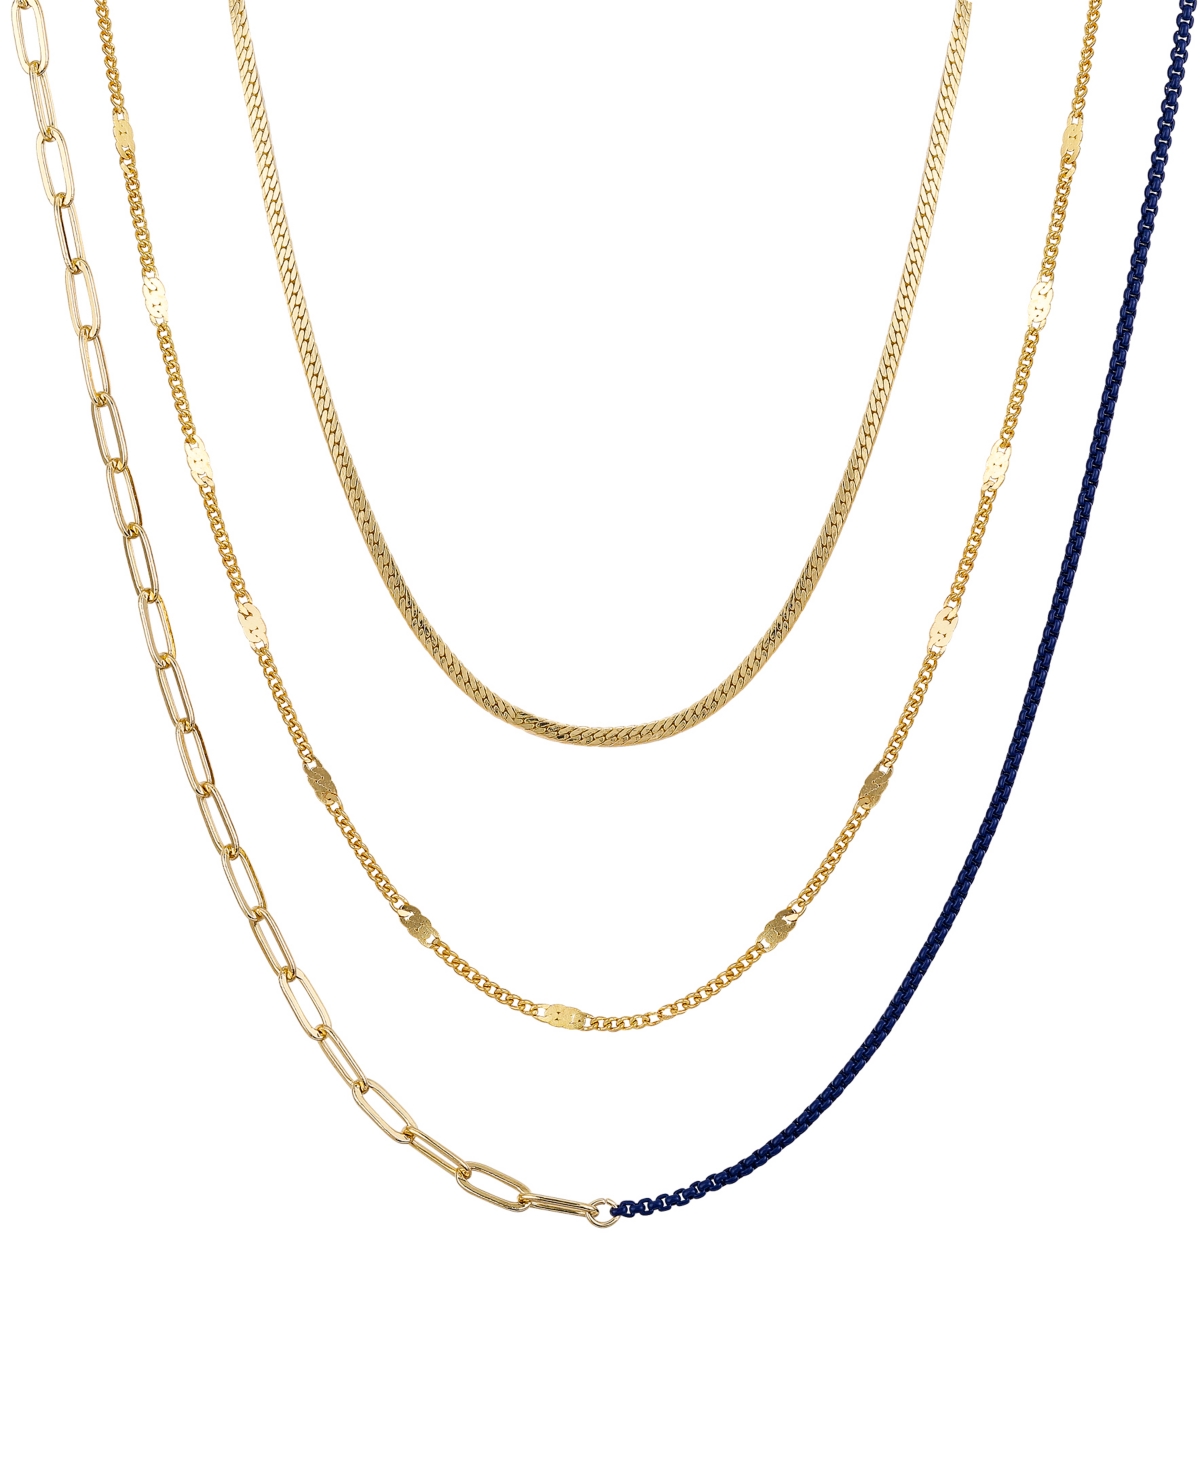 Unwritten 14k Gold Flash Plated White Enamel Paperclip Herringbone Chain Layered Necklaces, 3 Piece Set